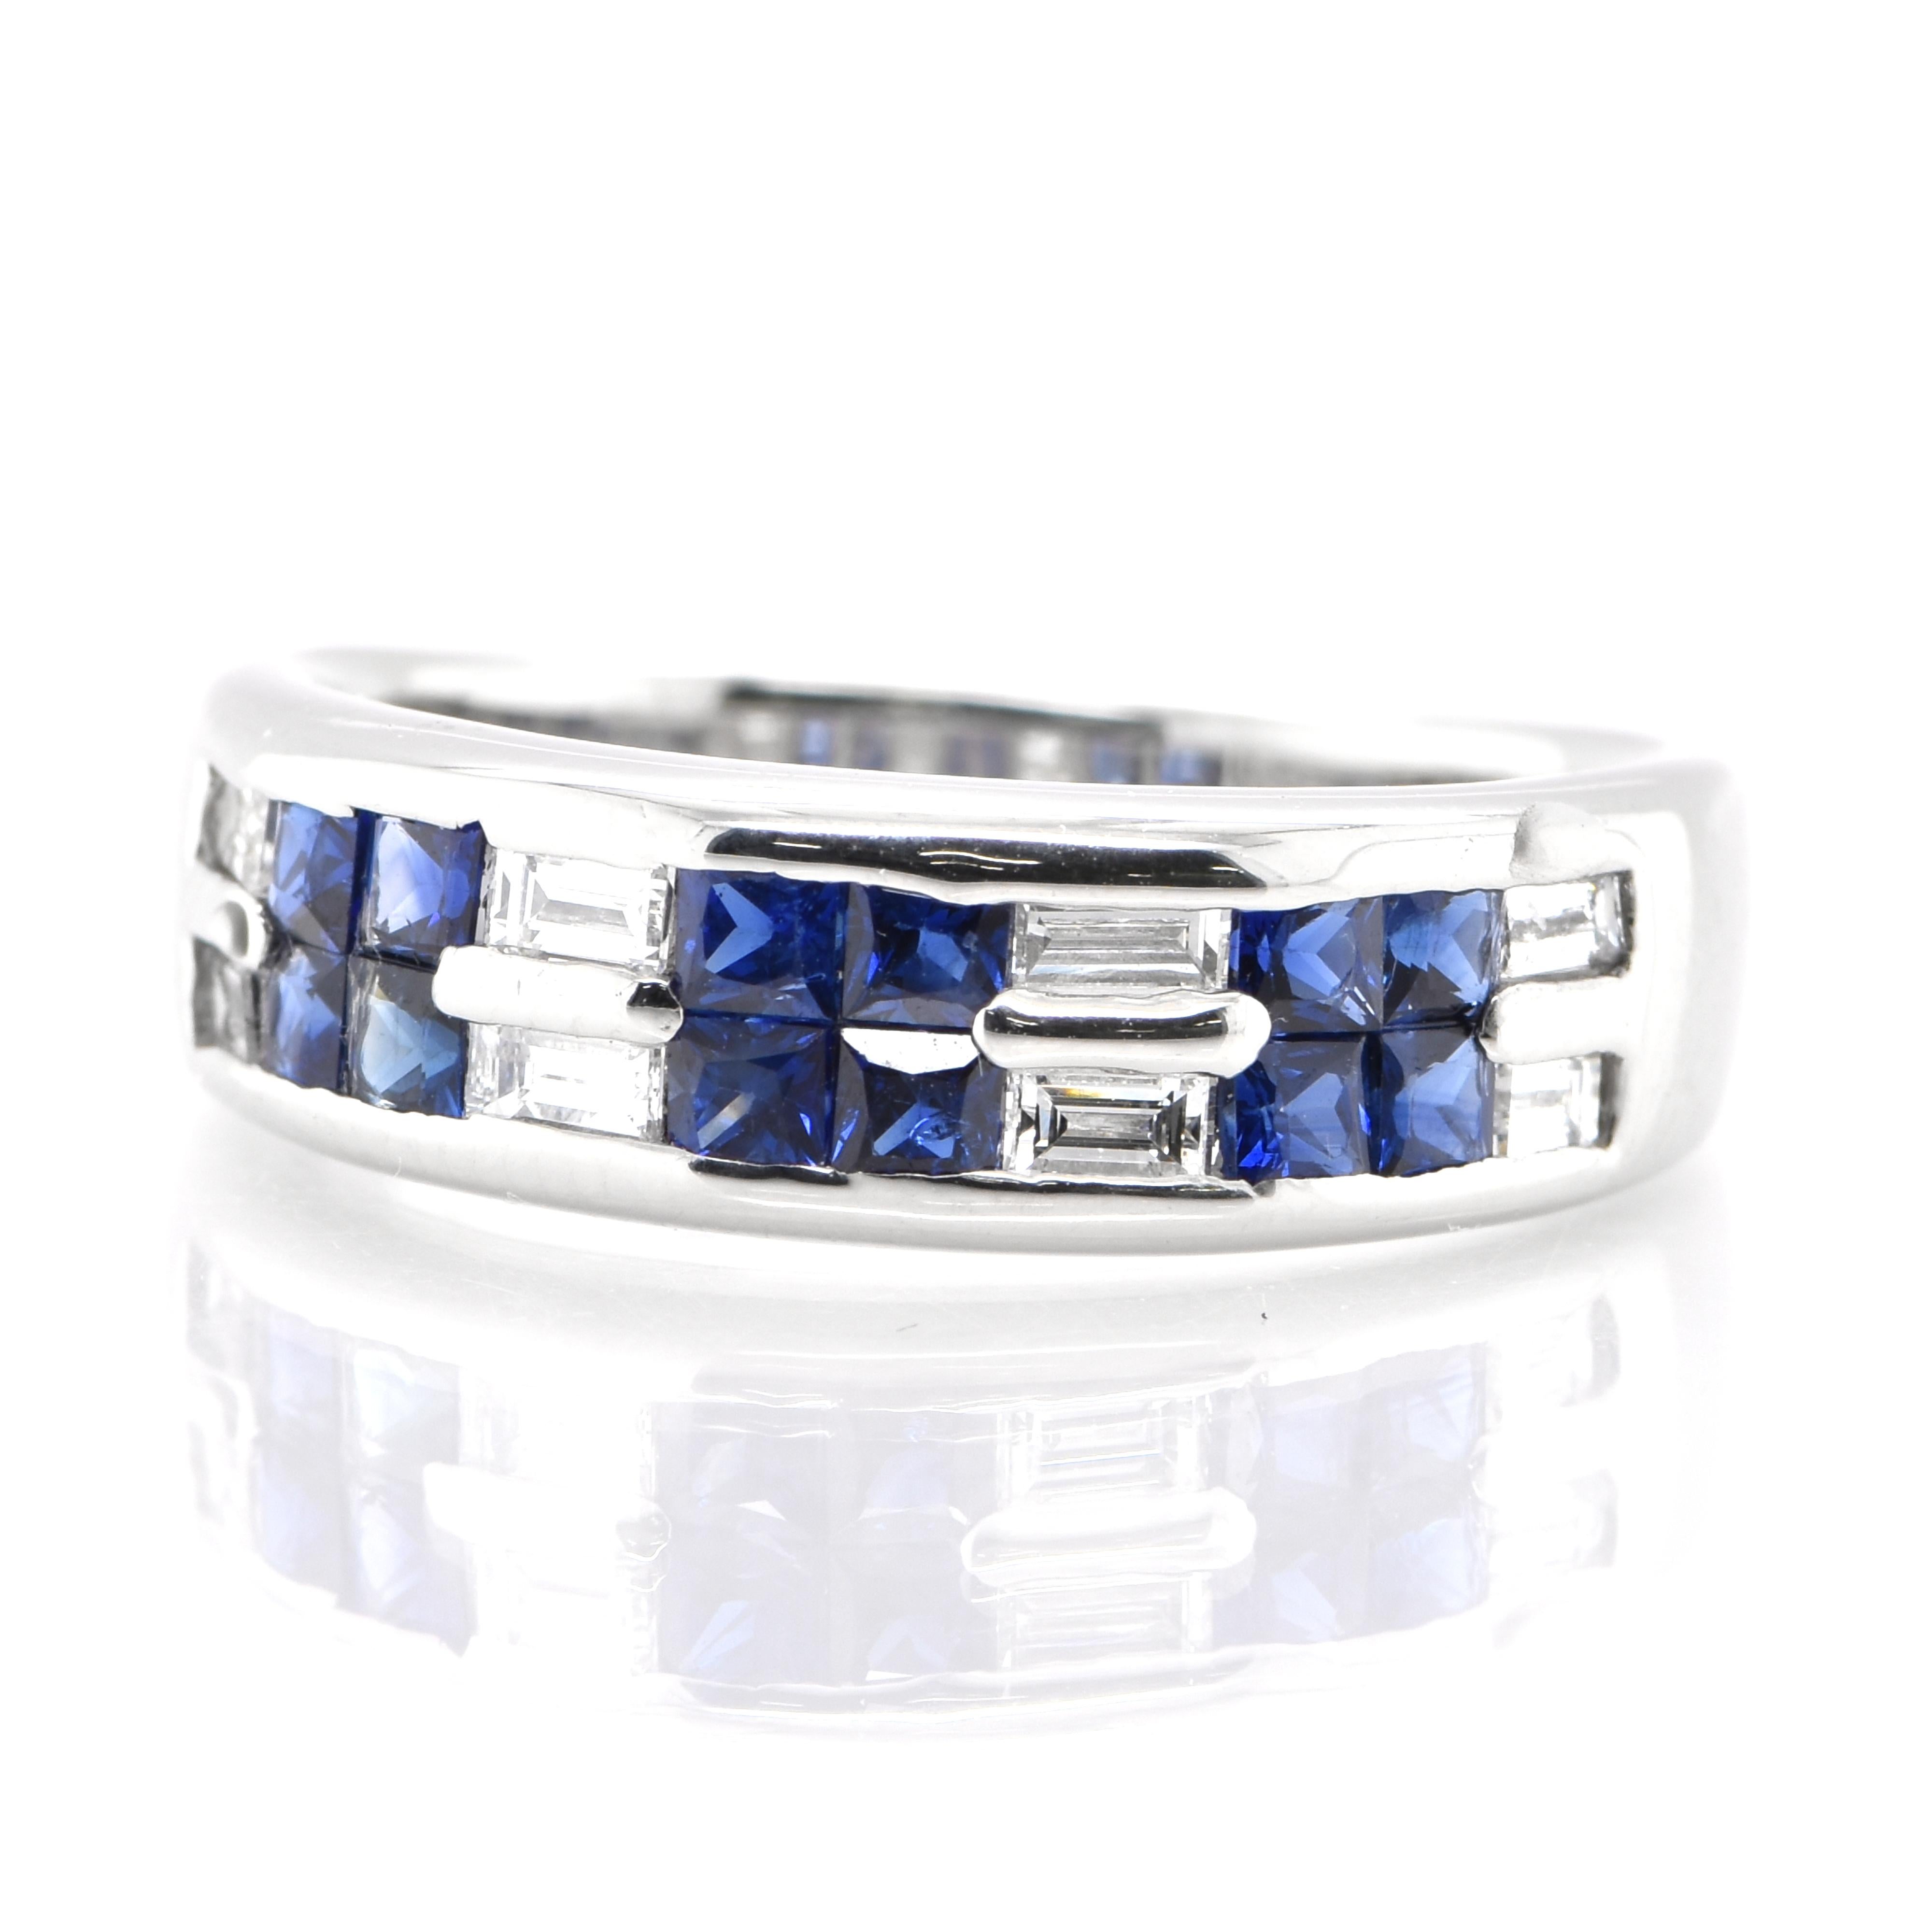 A beautiful half eternity band ring featuring 0.80 Carats Natural Princess Cut Sapphires and 0.35 Carats Diamond Accents set in Platinum. Sapphires have extraordinary durability - they excel in hardness as well as toughness and durability making